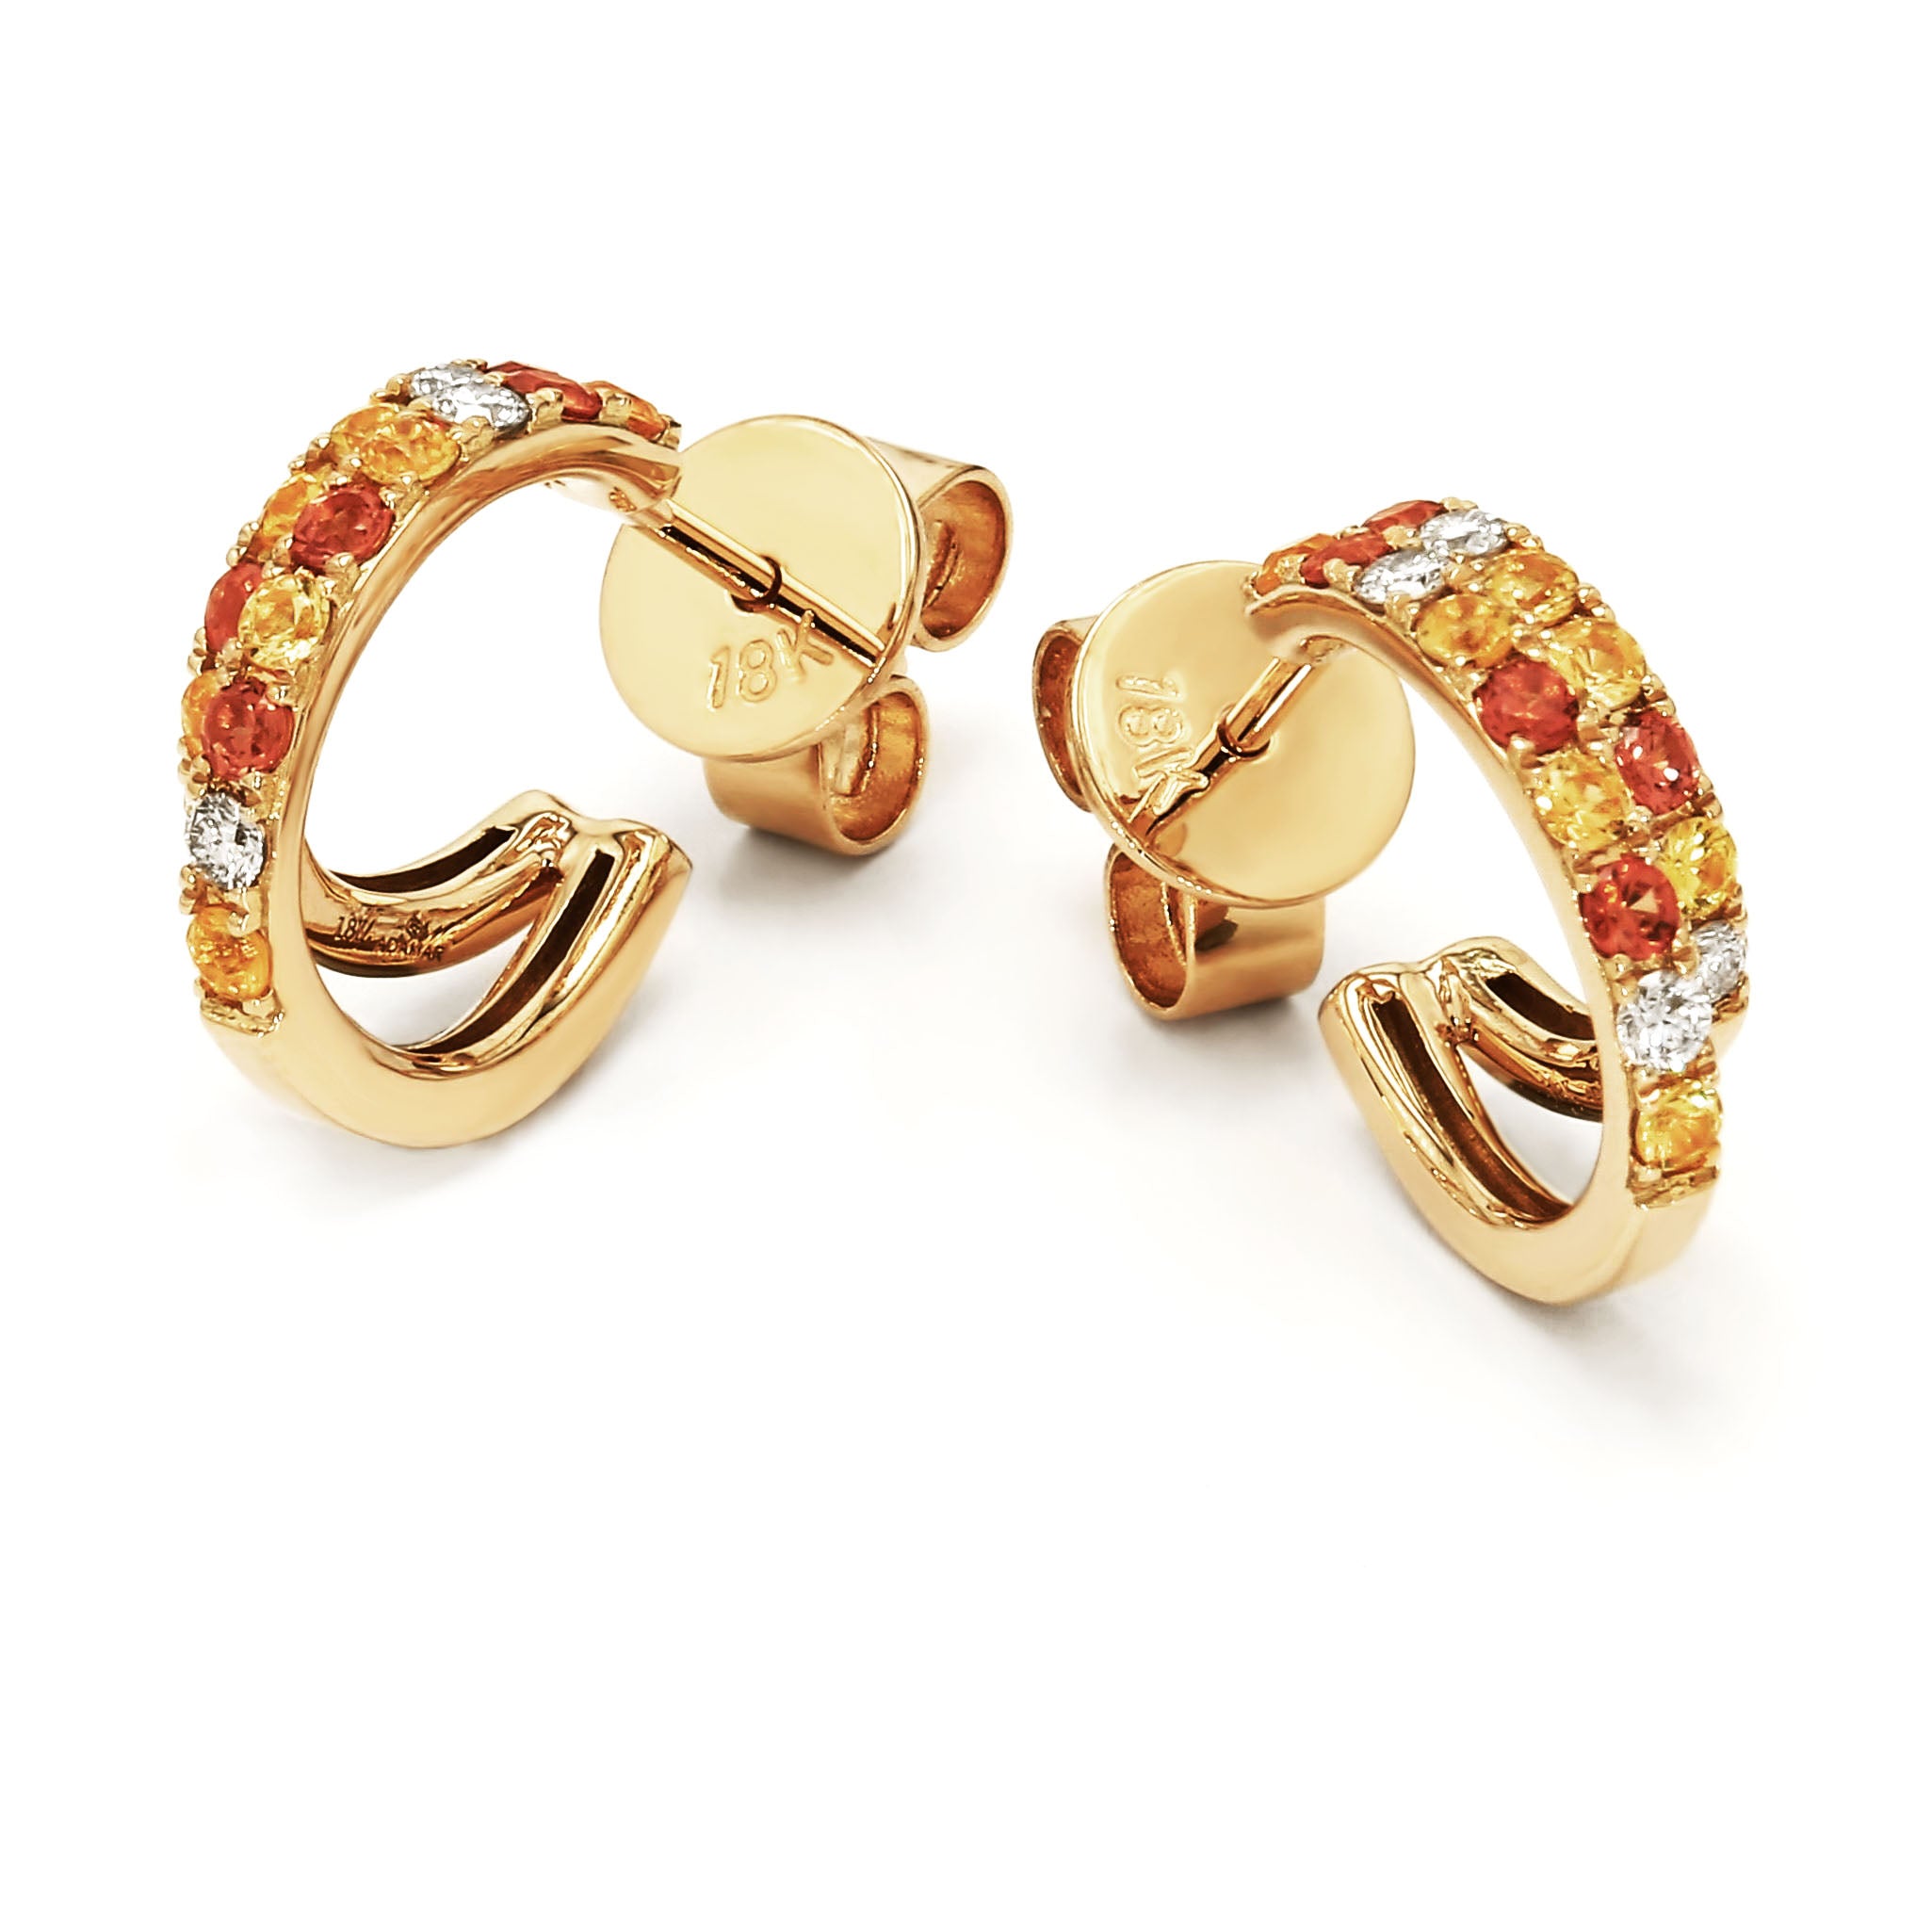 Adamar Jewels VISTOSO Duo Earrings in 18K yellow gold with colour sapphire and diamonds